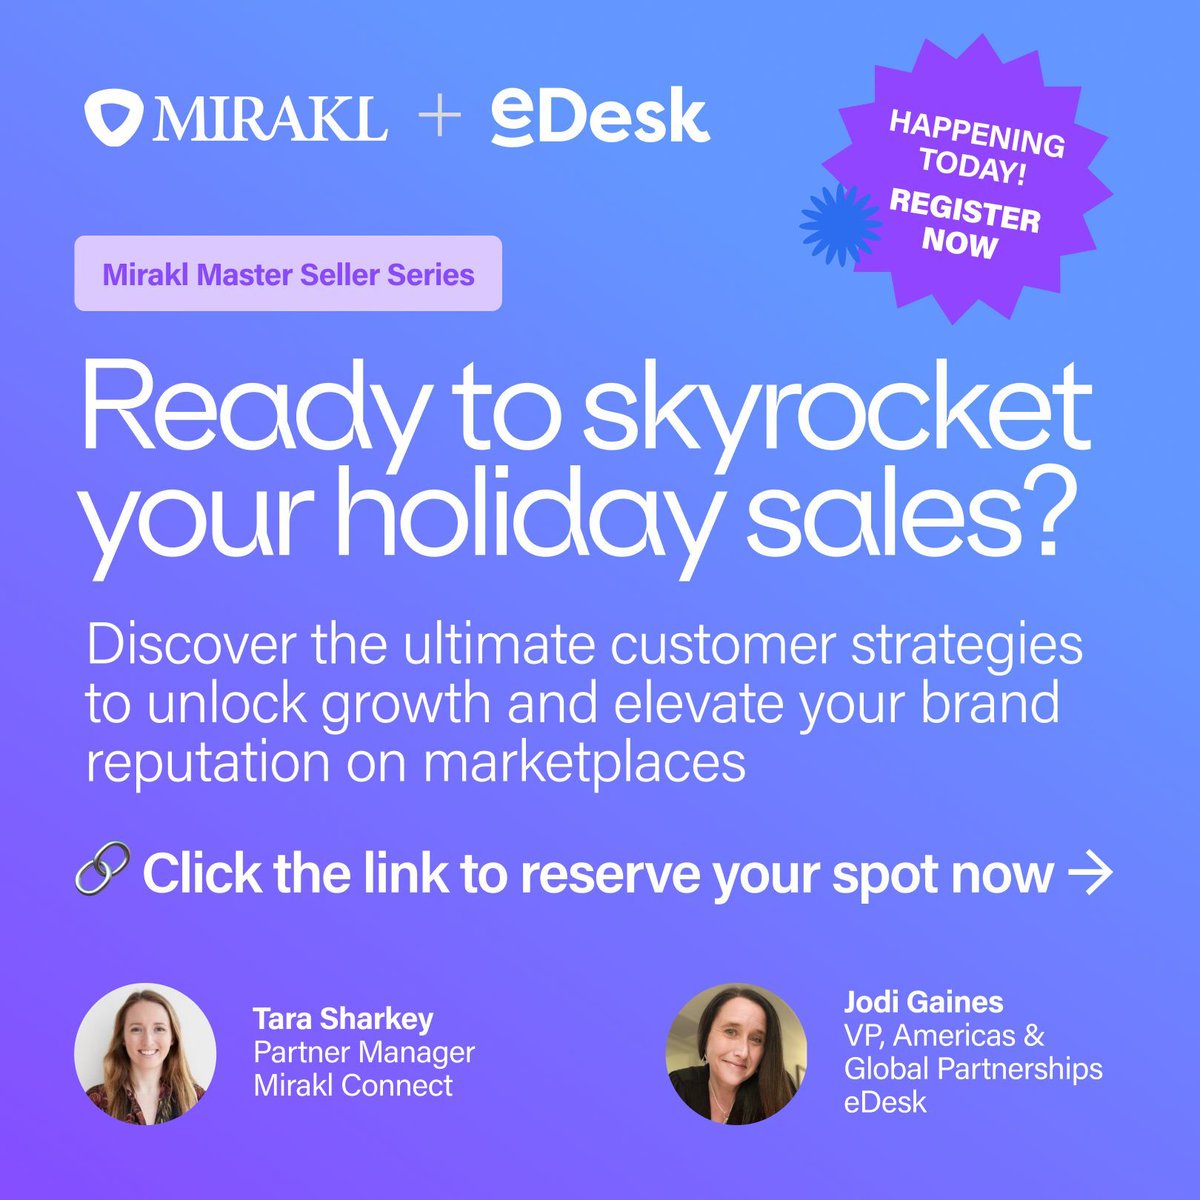 ⚠️ Only 3 hours until the event! Register now: buff.ly/3tJ99EF ⚠️ Join us today at 11am EST / 4pm CET as eDesk partners with Mirakl for the first session of their exclusive Master Seller Series.